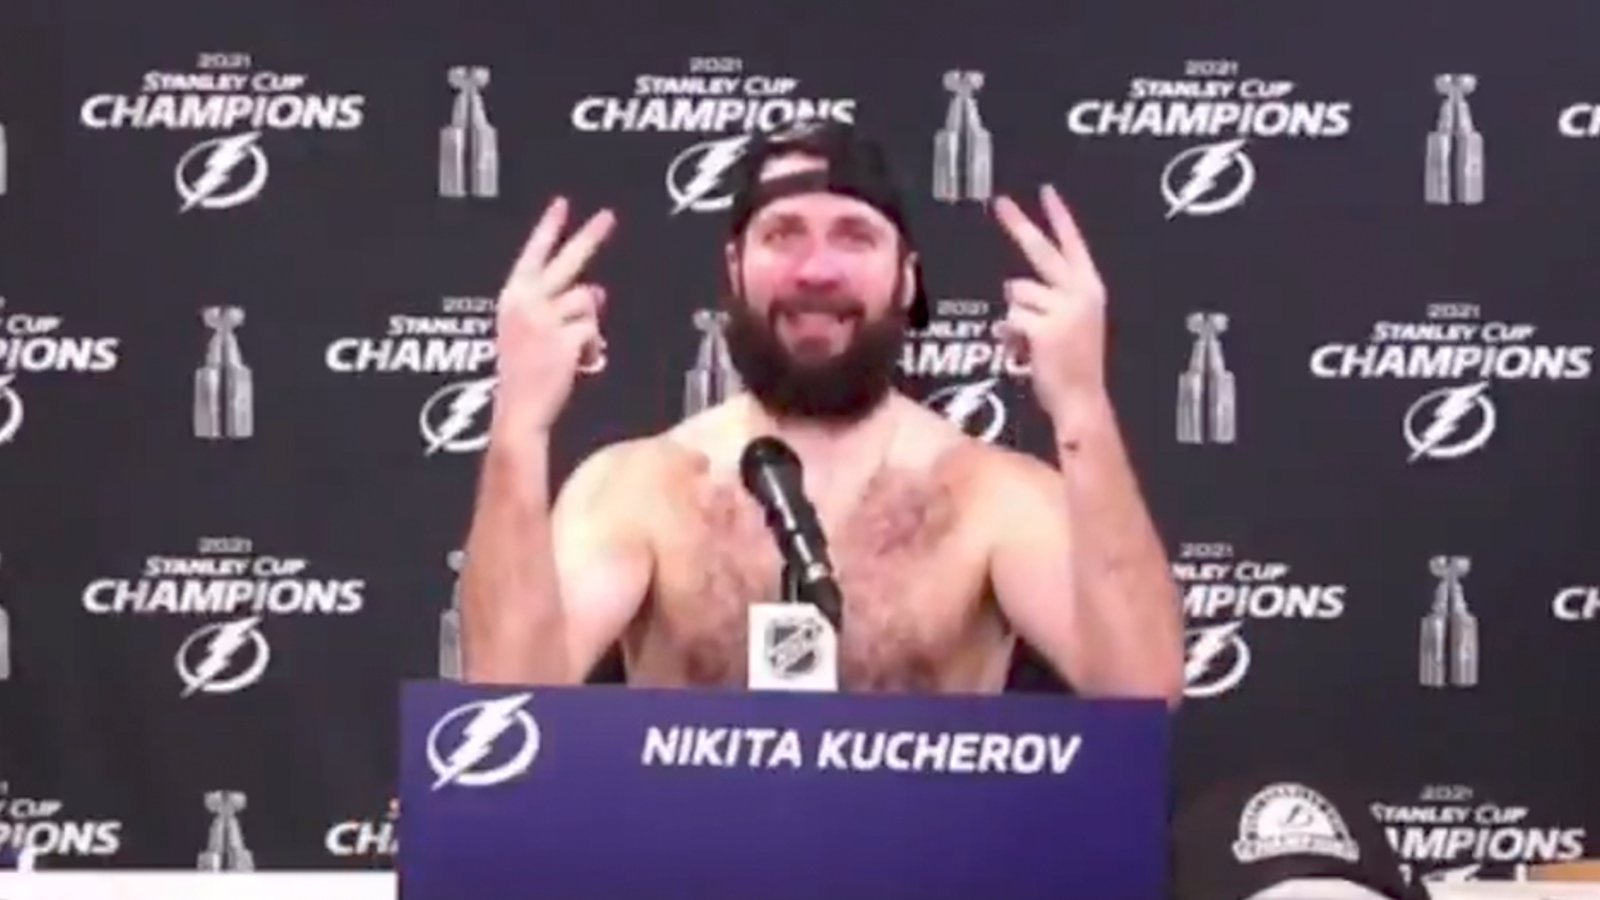 Nikita Kucherov absolutely brutalizes Canadiens fans with savage post-game comments  